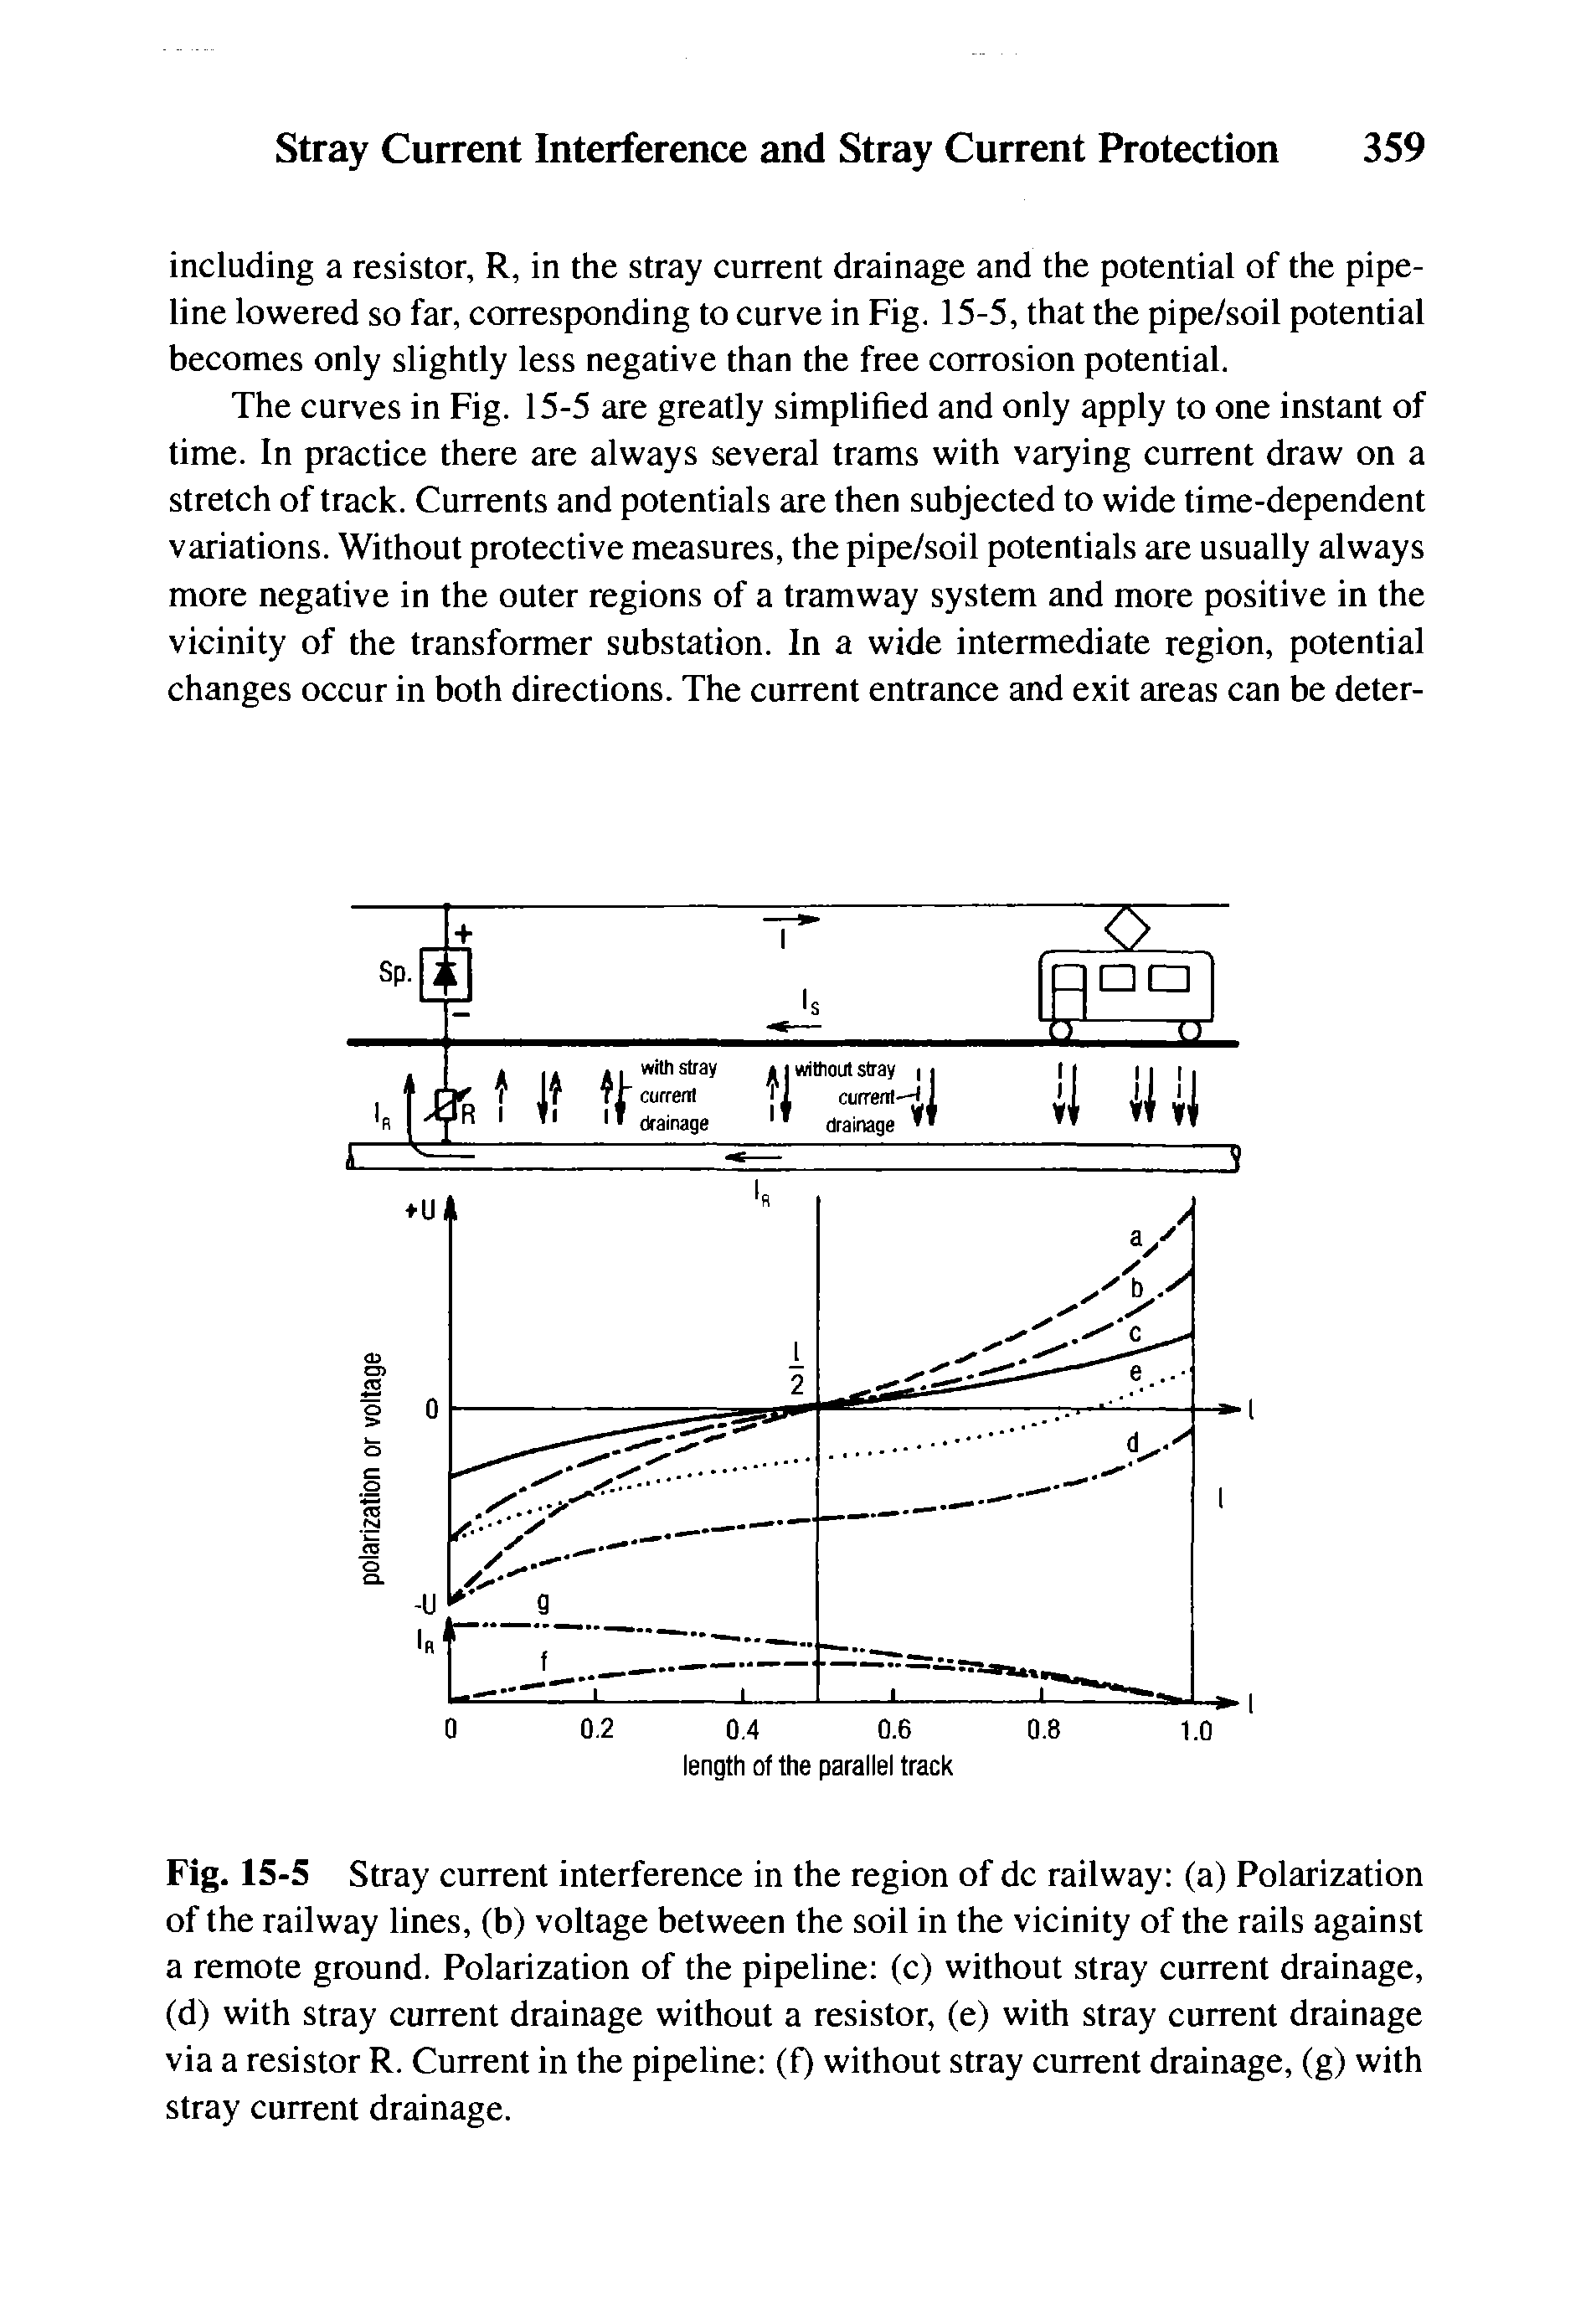 Fig. 15-5 Stray current interference in the region of dc railway (a) Polarization of the railway lines, (b) voltage between the soil in the vicinity of the rails against a remote ground. Polarization of the pipeline (c) without stray current drainage, (d) with stray current drainage without a resistor, (e) with stray current drainage via a resistor R. Current in the pipeline (f) without stray current drainage, (g) with stray current drainage.